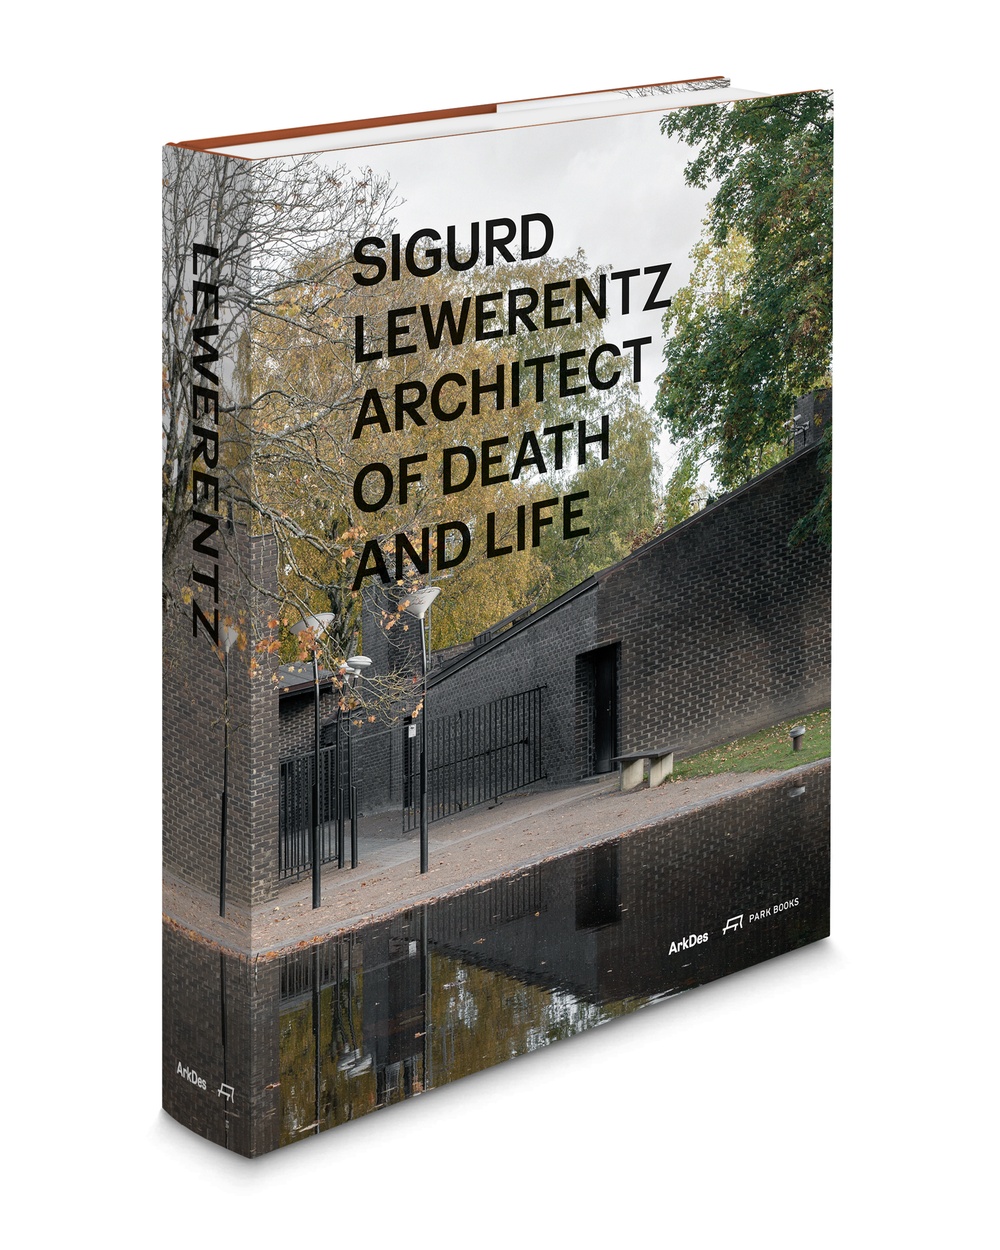 ArkDes will produce a landmark new book in connection with the exhibition, which will be the first ever published with full access to Lewerentz’s archive. Designed by award-winning graphic designer Malmsten Hellberg.